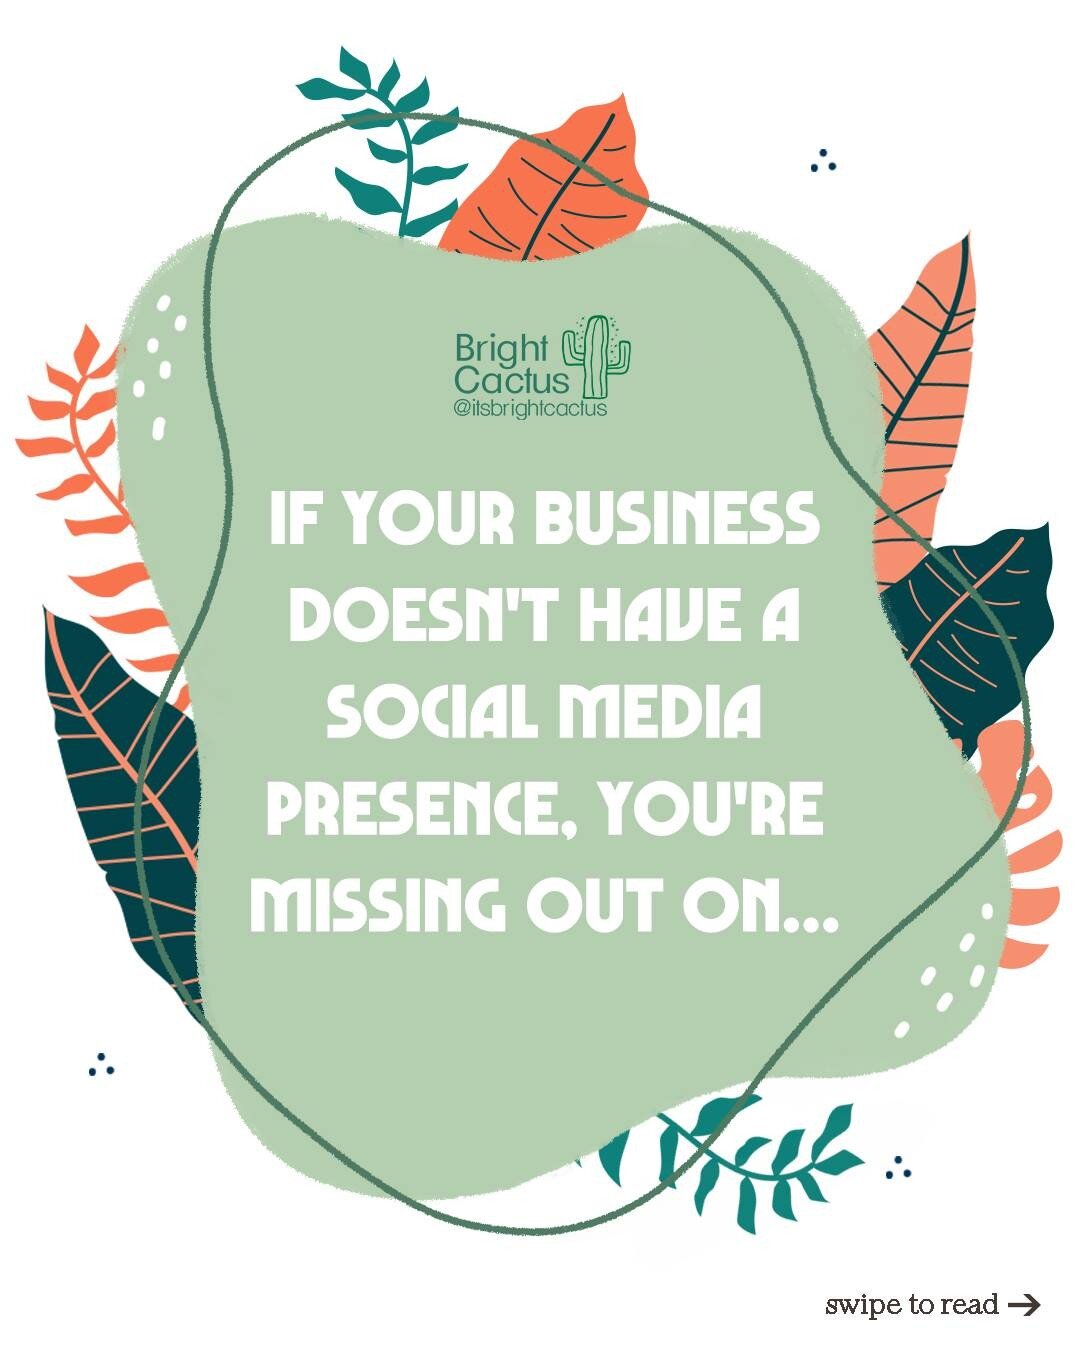 At this point it's foolish for B2C businesses not to be on social media. Not every brand has the time and resources to invest in a thorough strategy and management (although that definitely helps) but simply existing online increases your chances of 